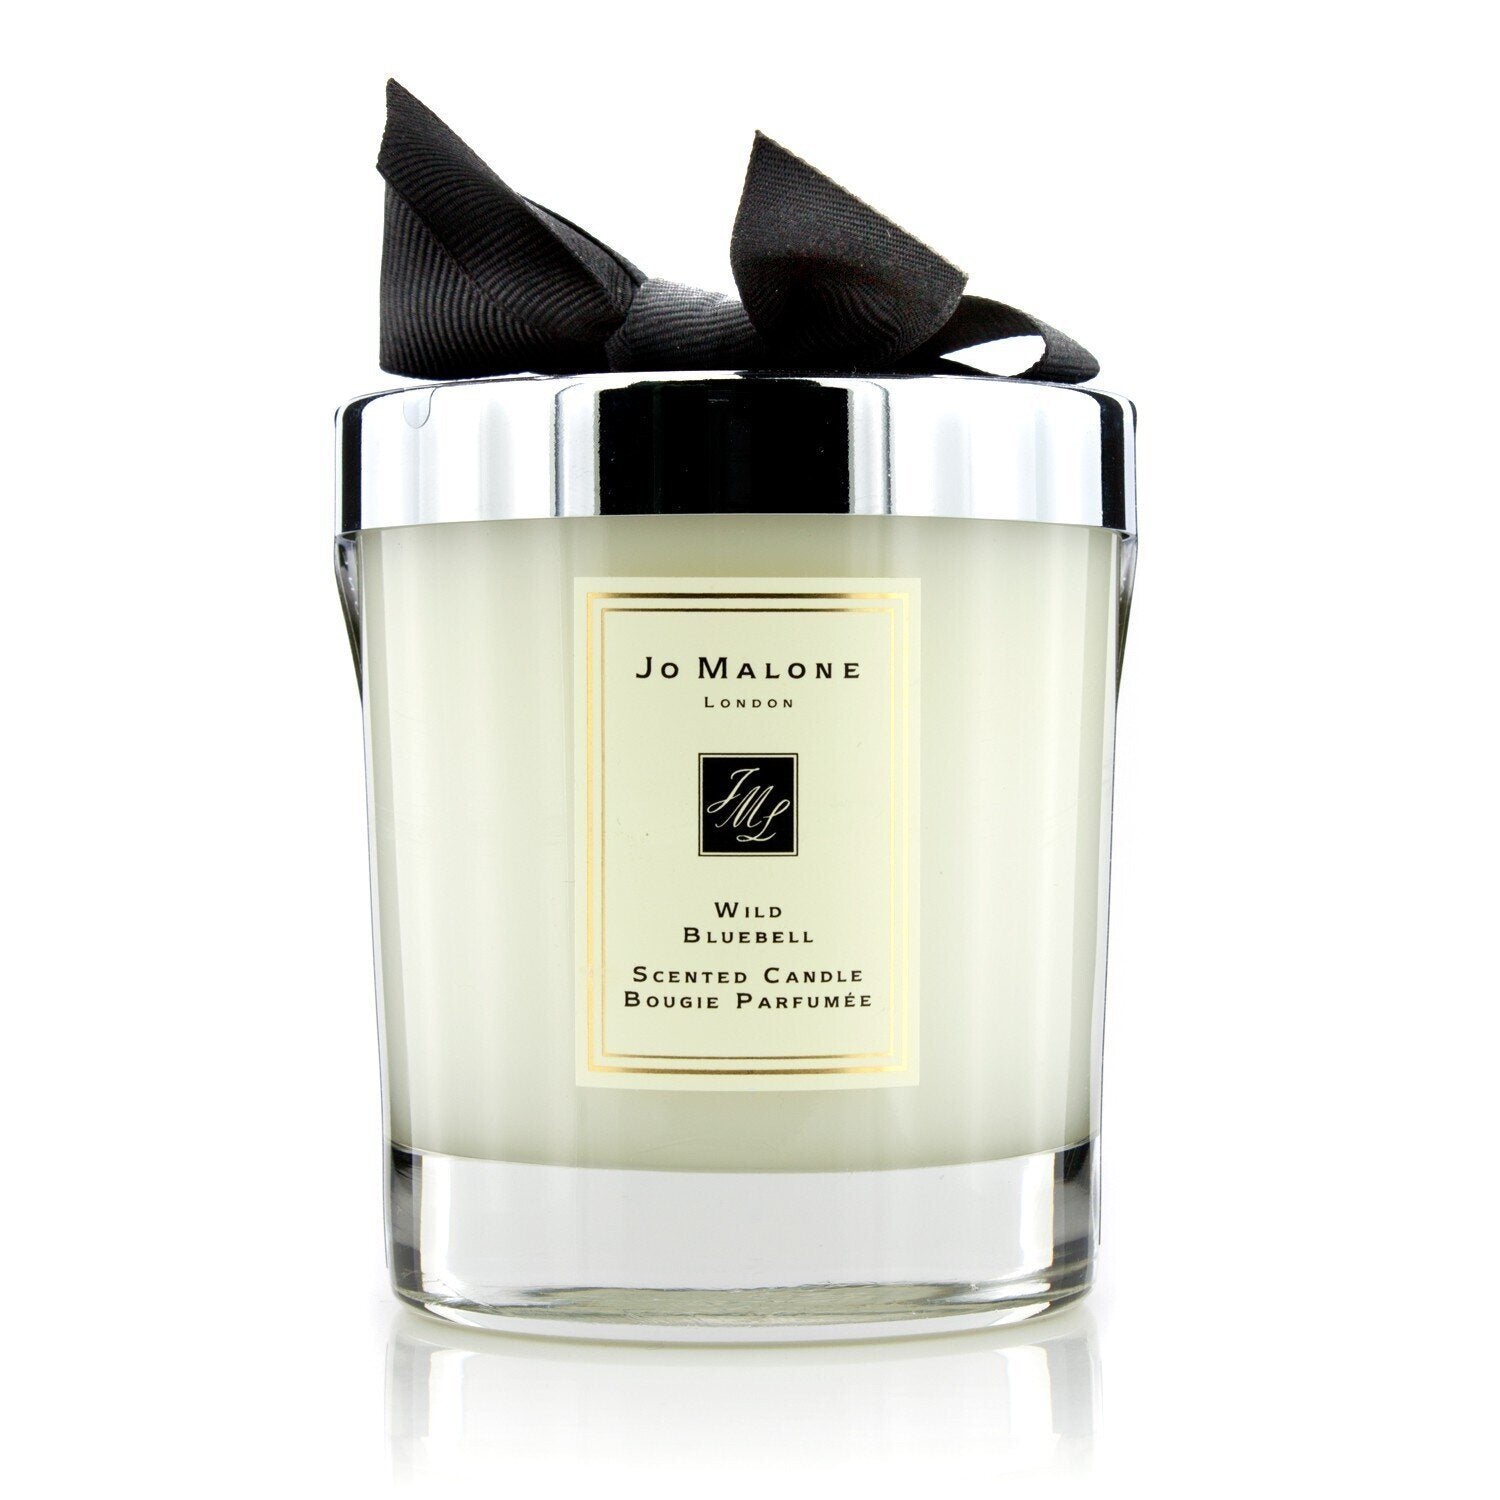 JO MALONE - Wild Bluebell Scented Candle - 200g (2.5 inch) 3P's Inclusive Beauty